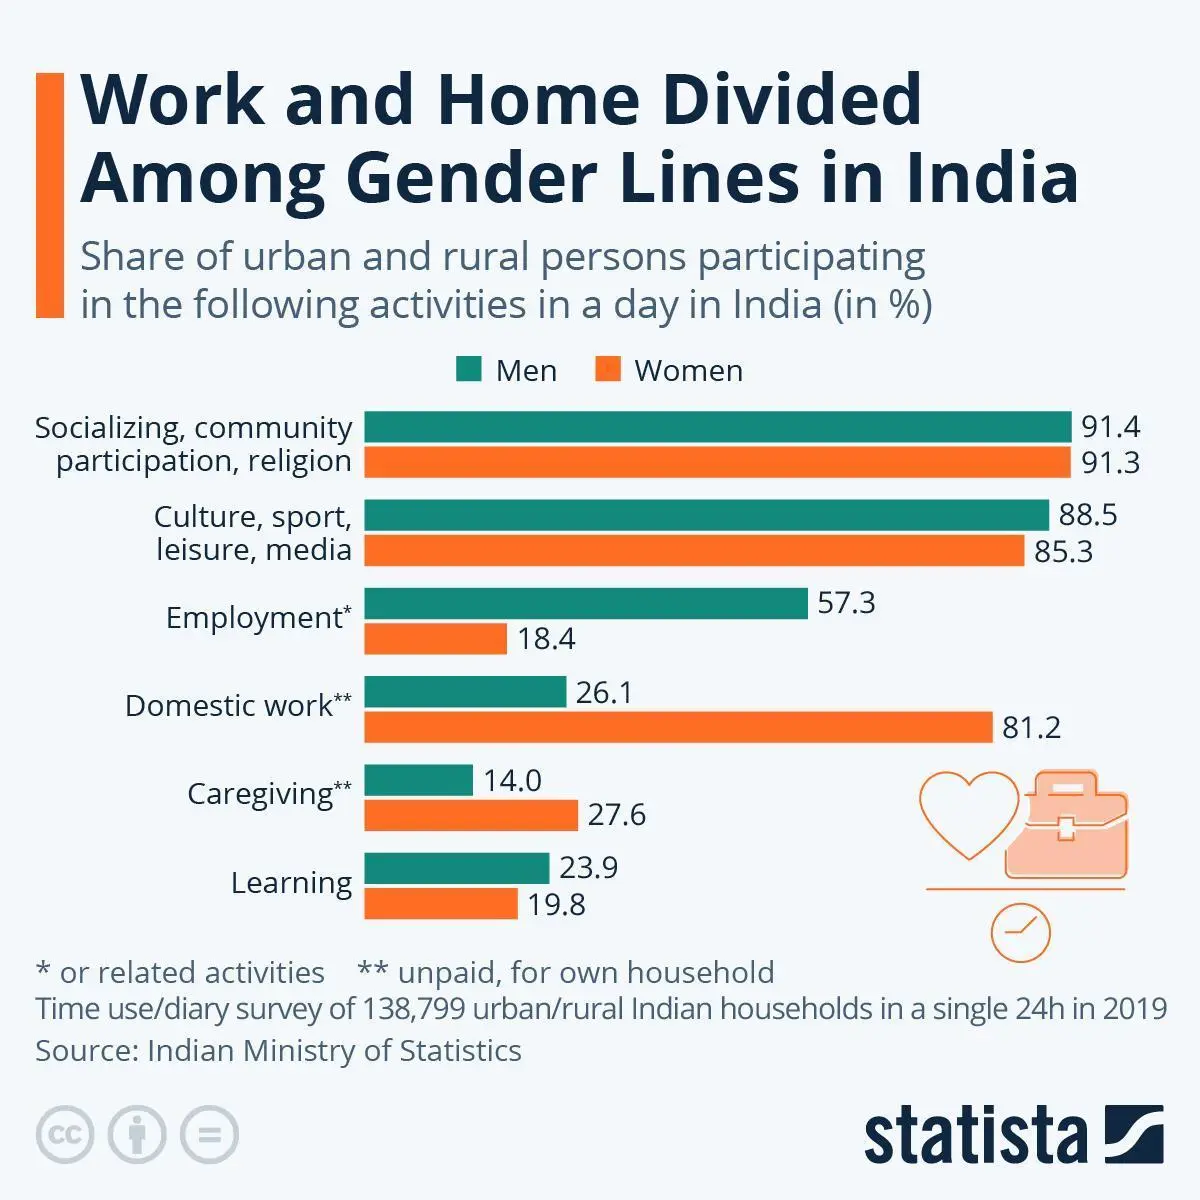 Work and Home Divided Among Gender Lines in India